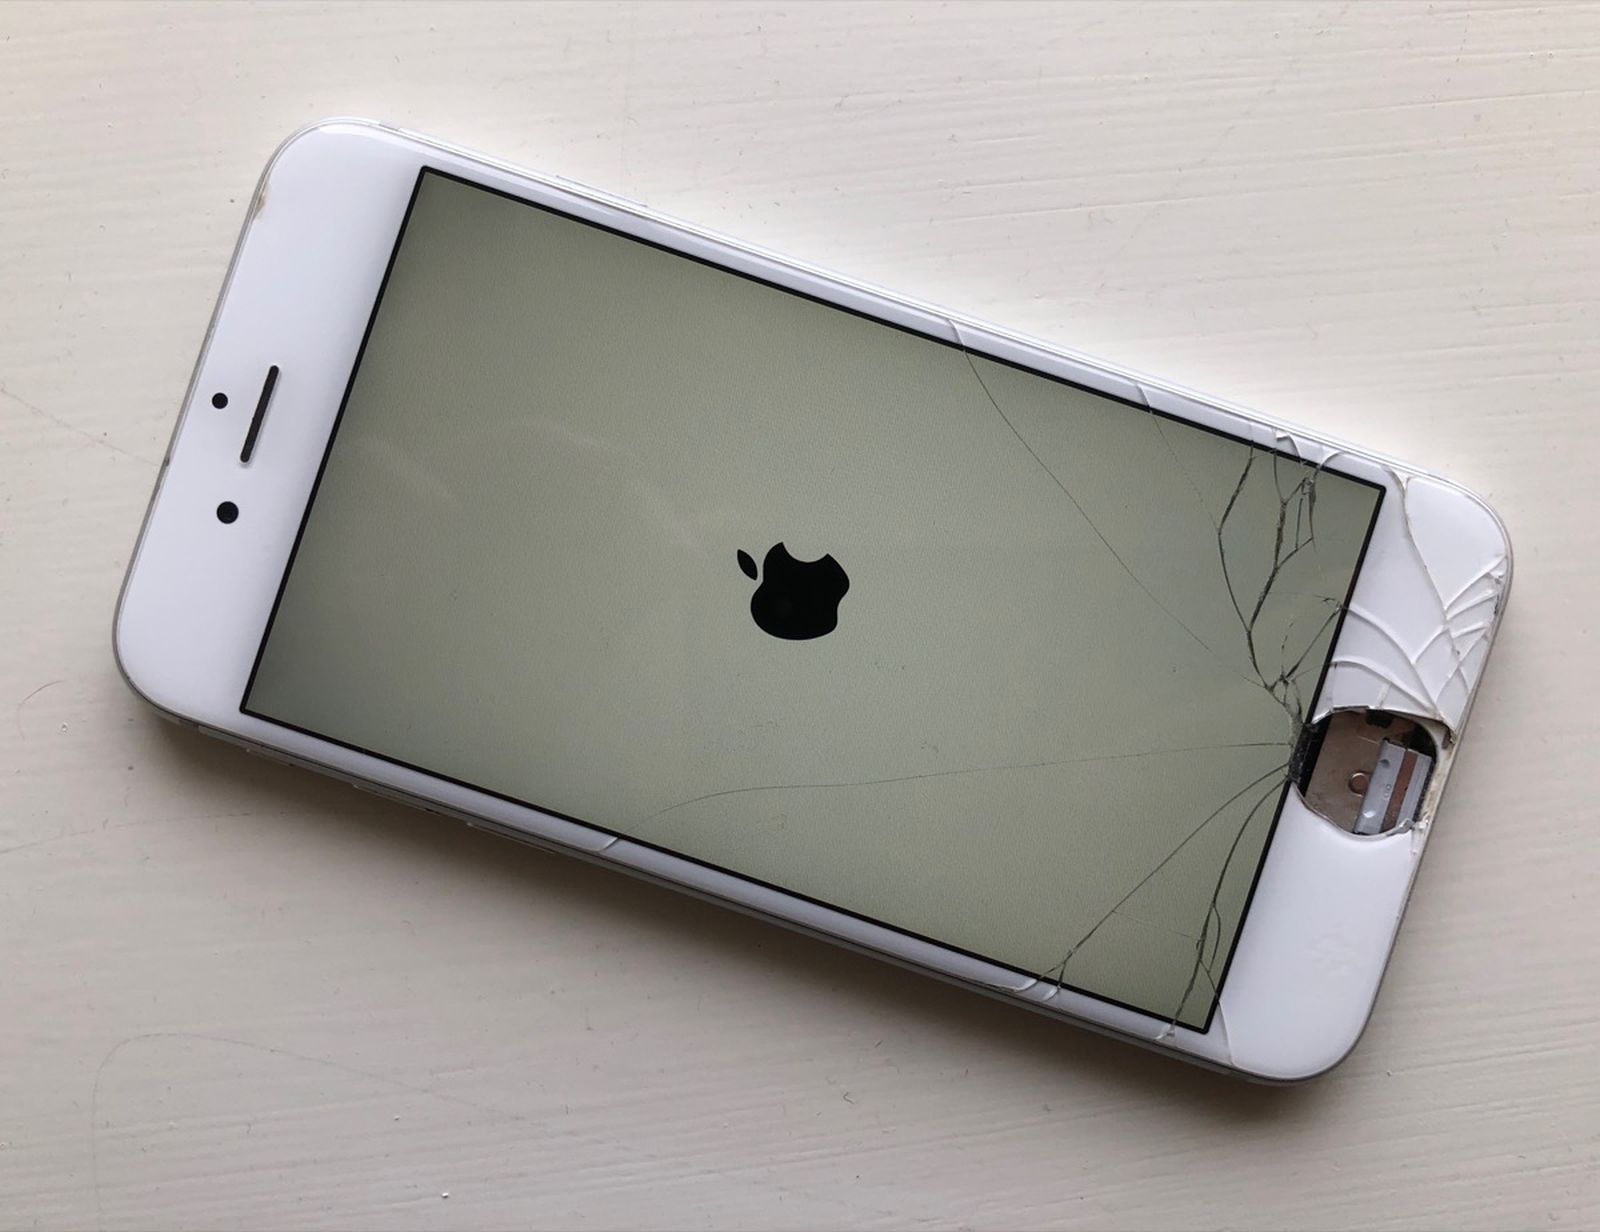 How To Unlock Iphone With Broken Screen And Home Button